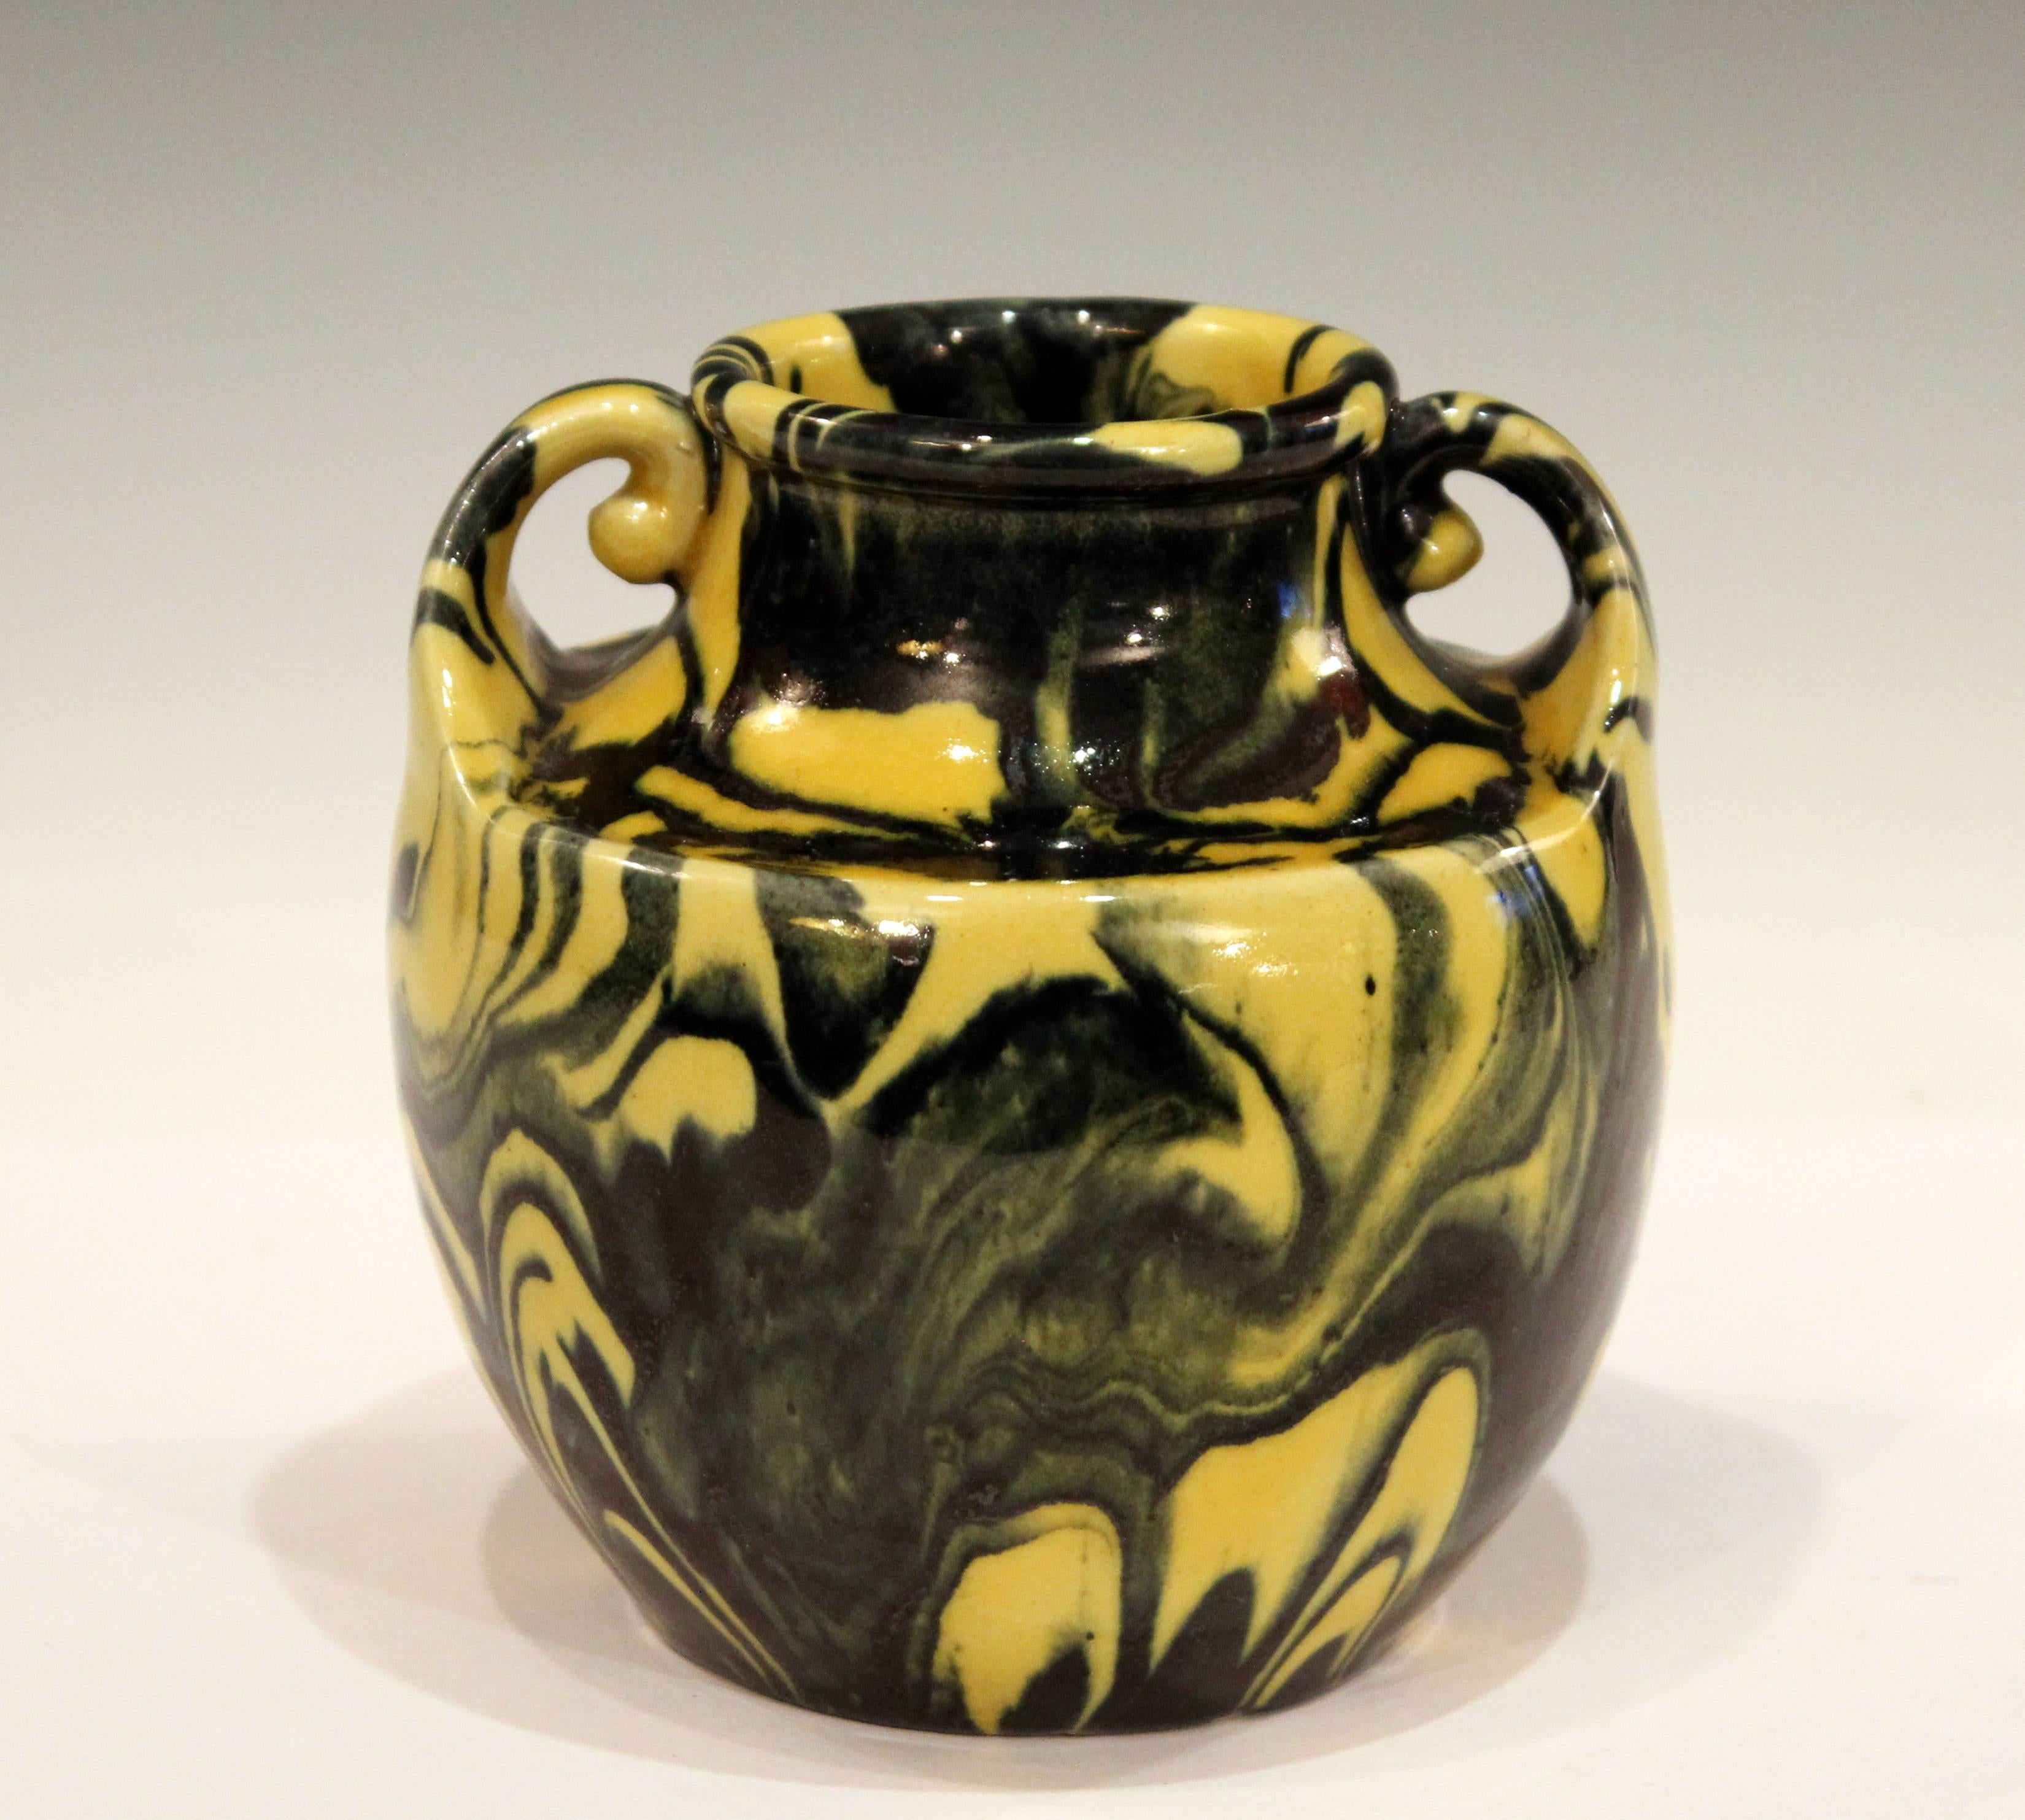 Awaji pottery vase in Art Deco form with little curled handles reaching up from the flattened shoulder, circa 1930. With striking combination of yellow and black metallic glazes marbled to great effect with strong contrasts. 5